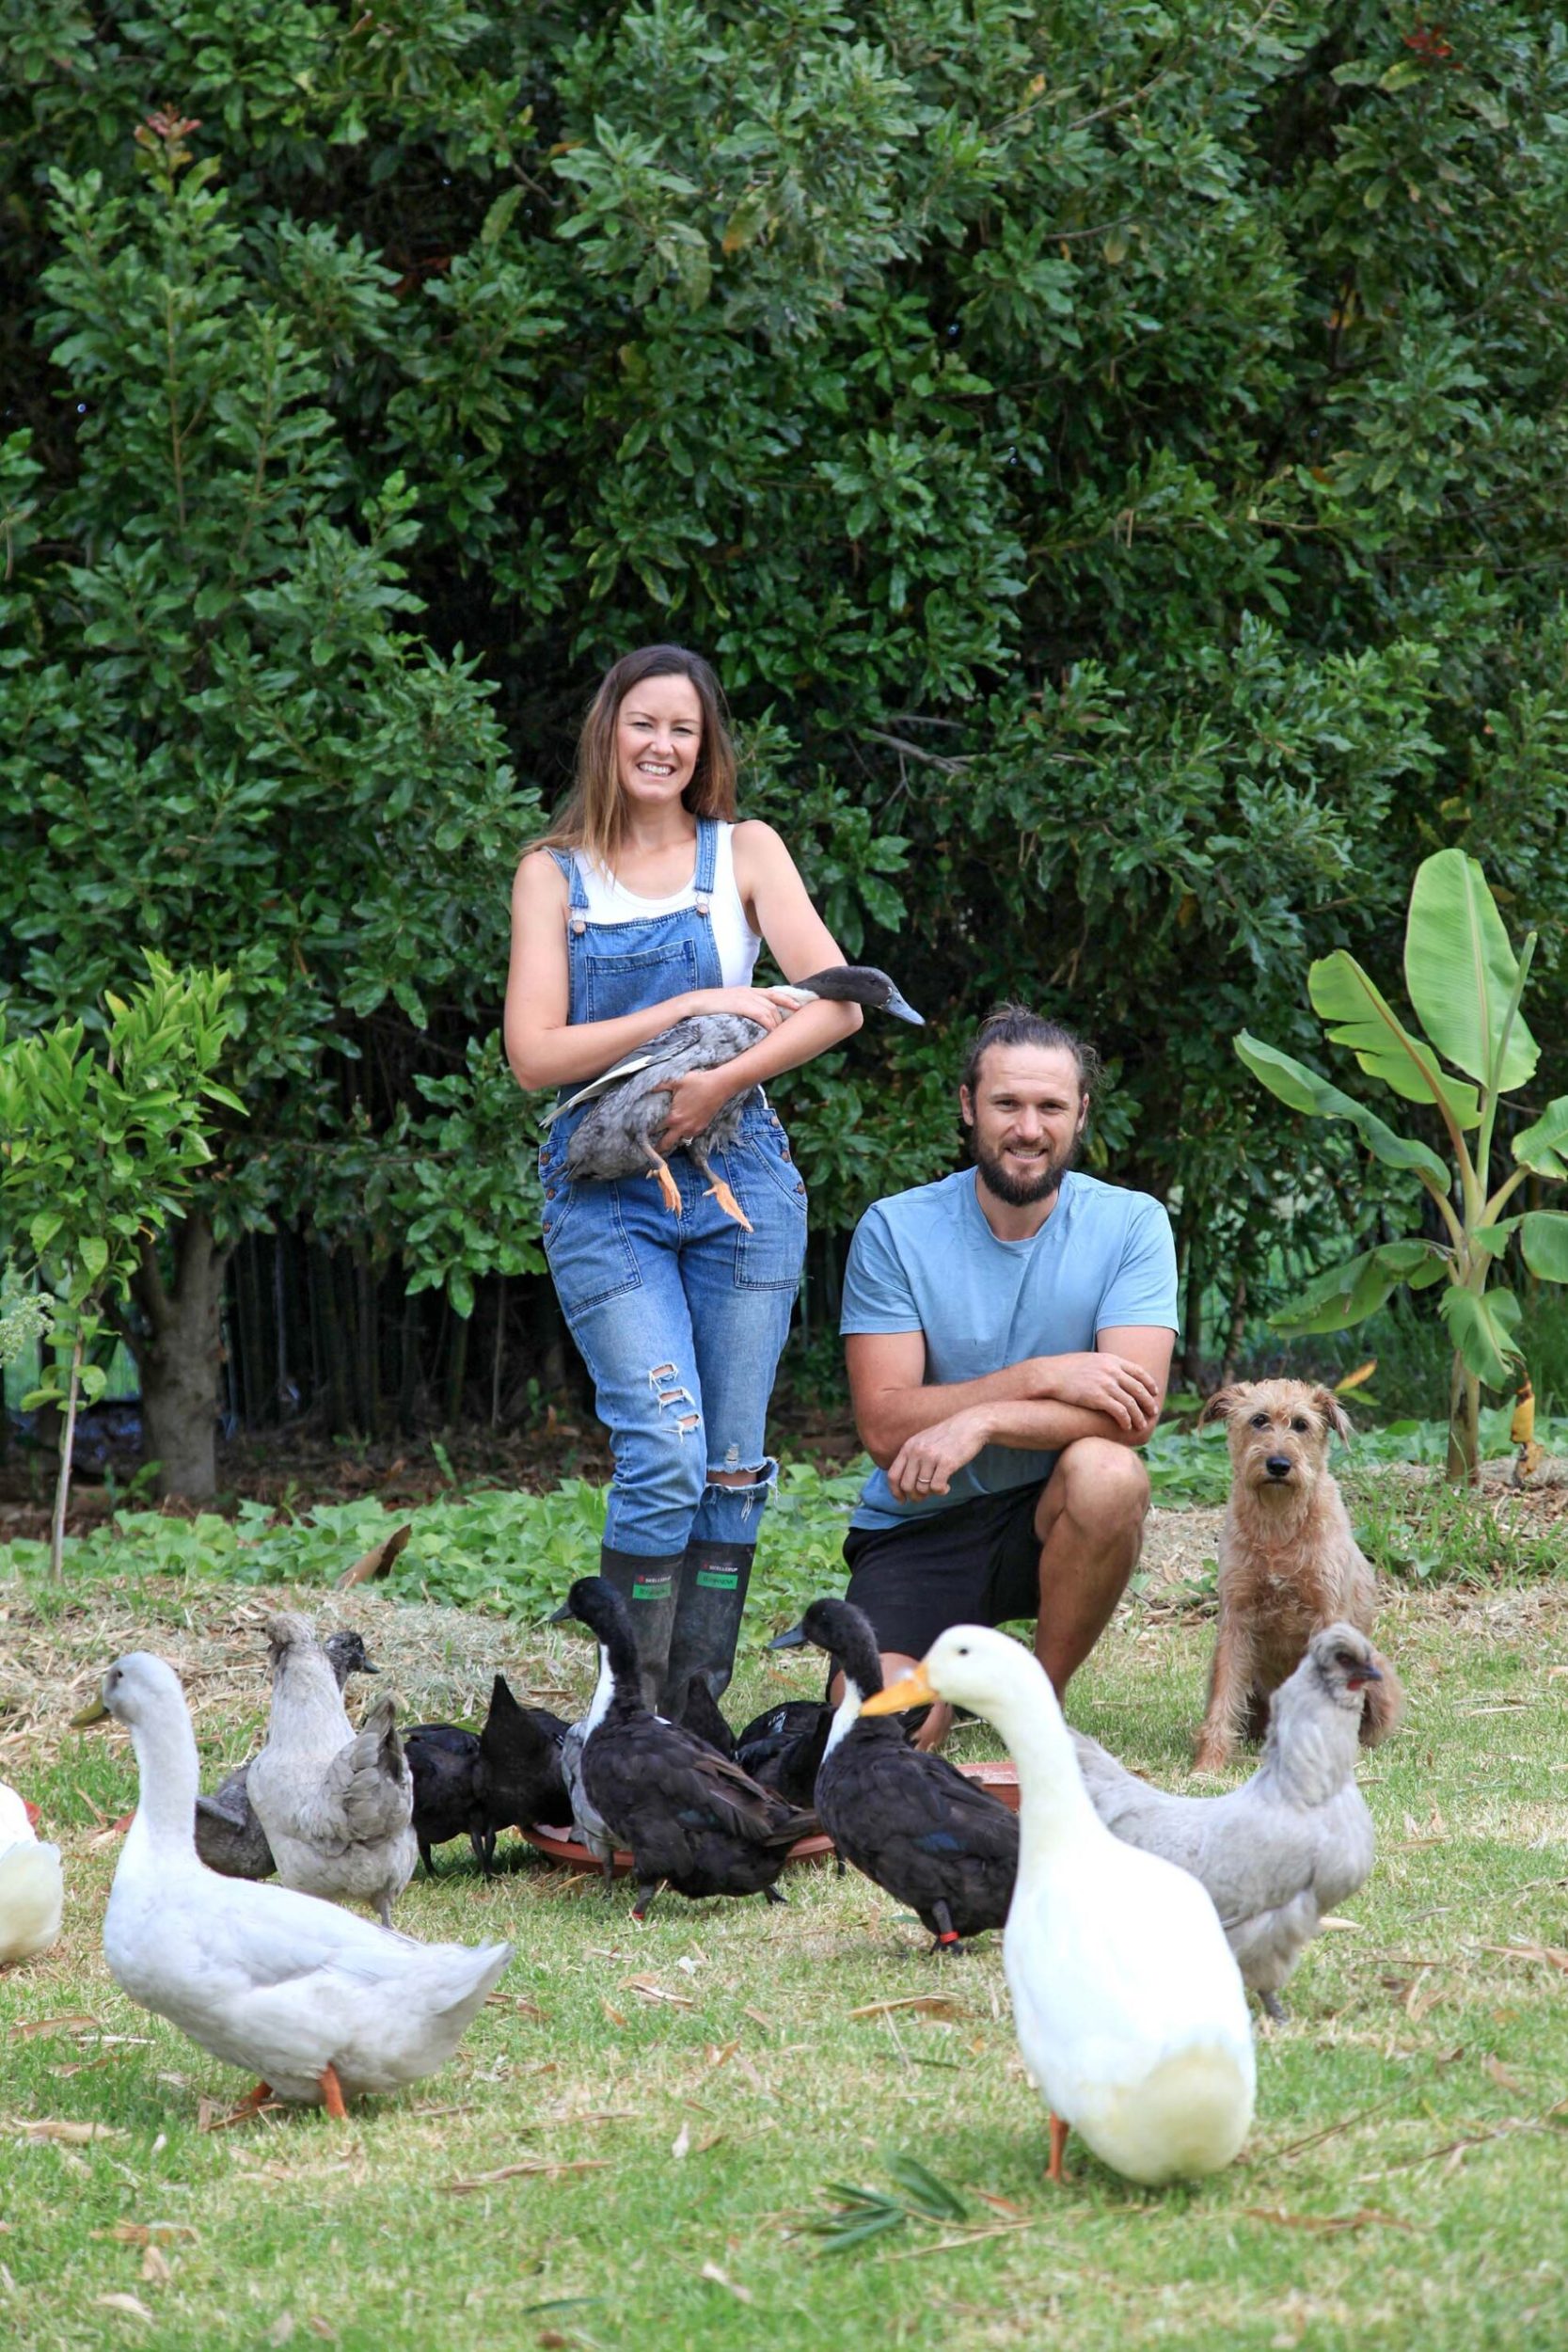 Couple in with Irish terrier dog and a flock of ducks